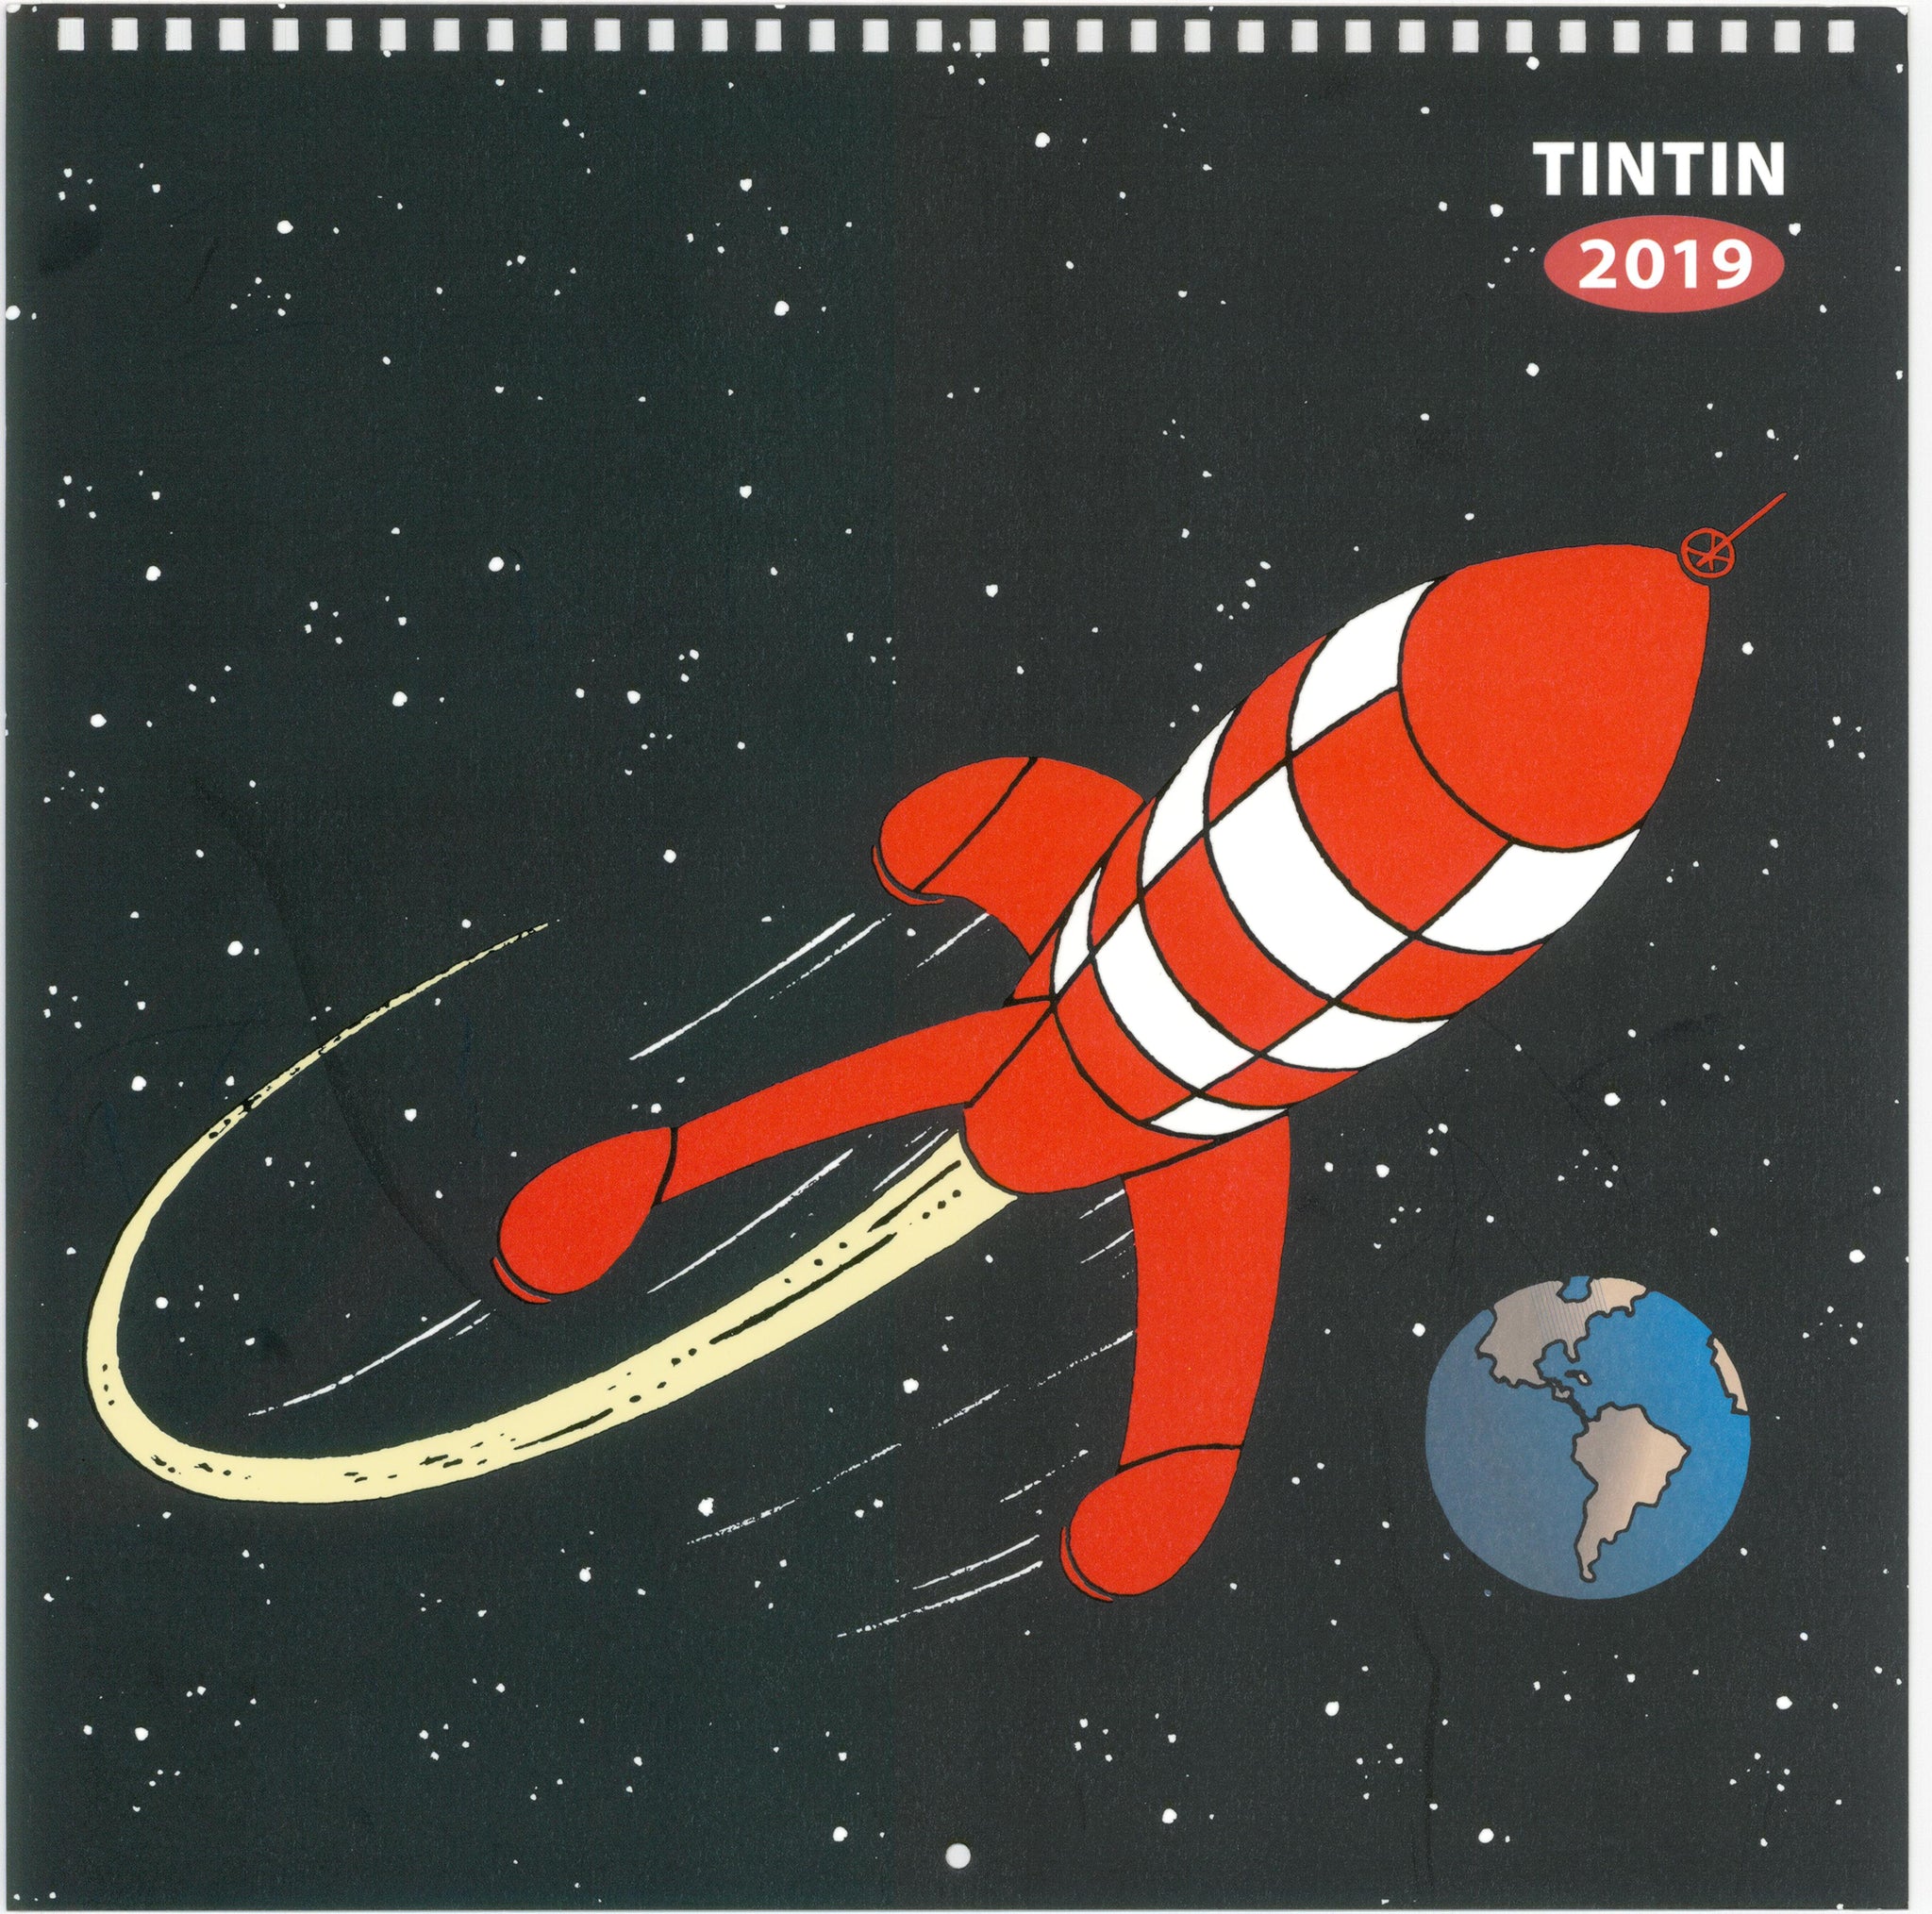 Moulinsart Collectible Figurine Tintin in Astronaut 8cm 42505 (2019)